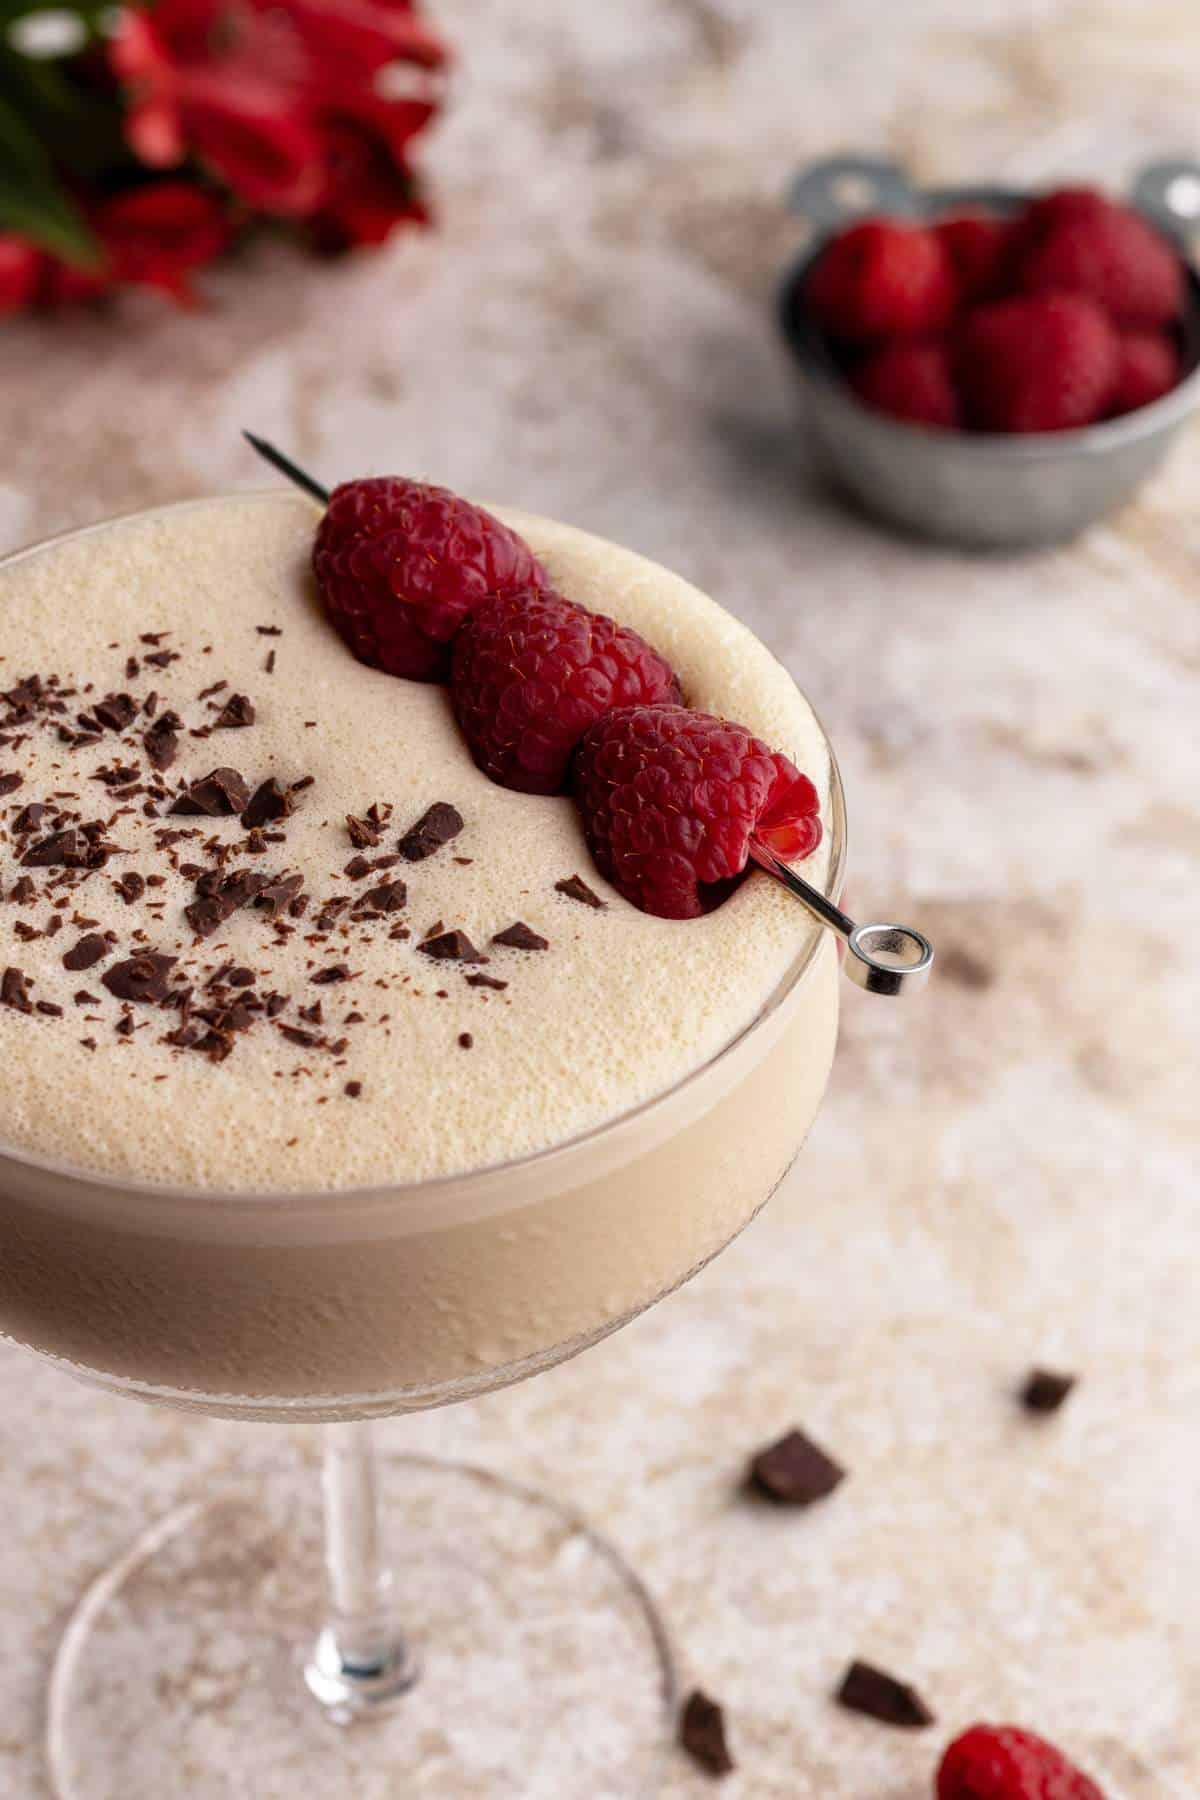 Raspberry chocolate martini in a glass with garnishes.